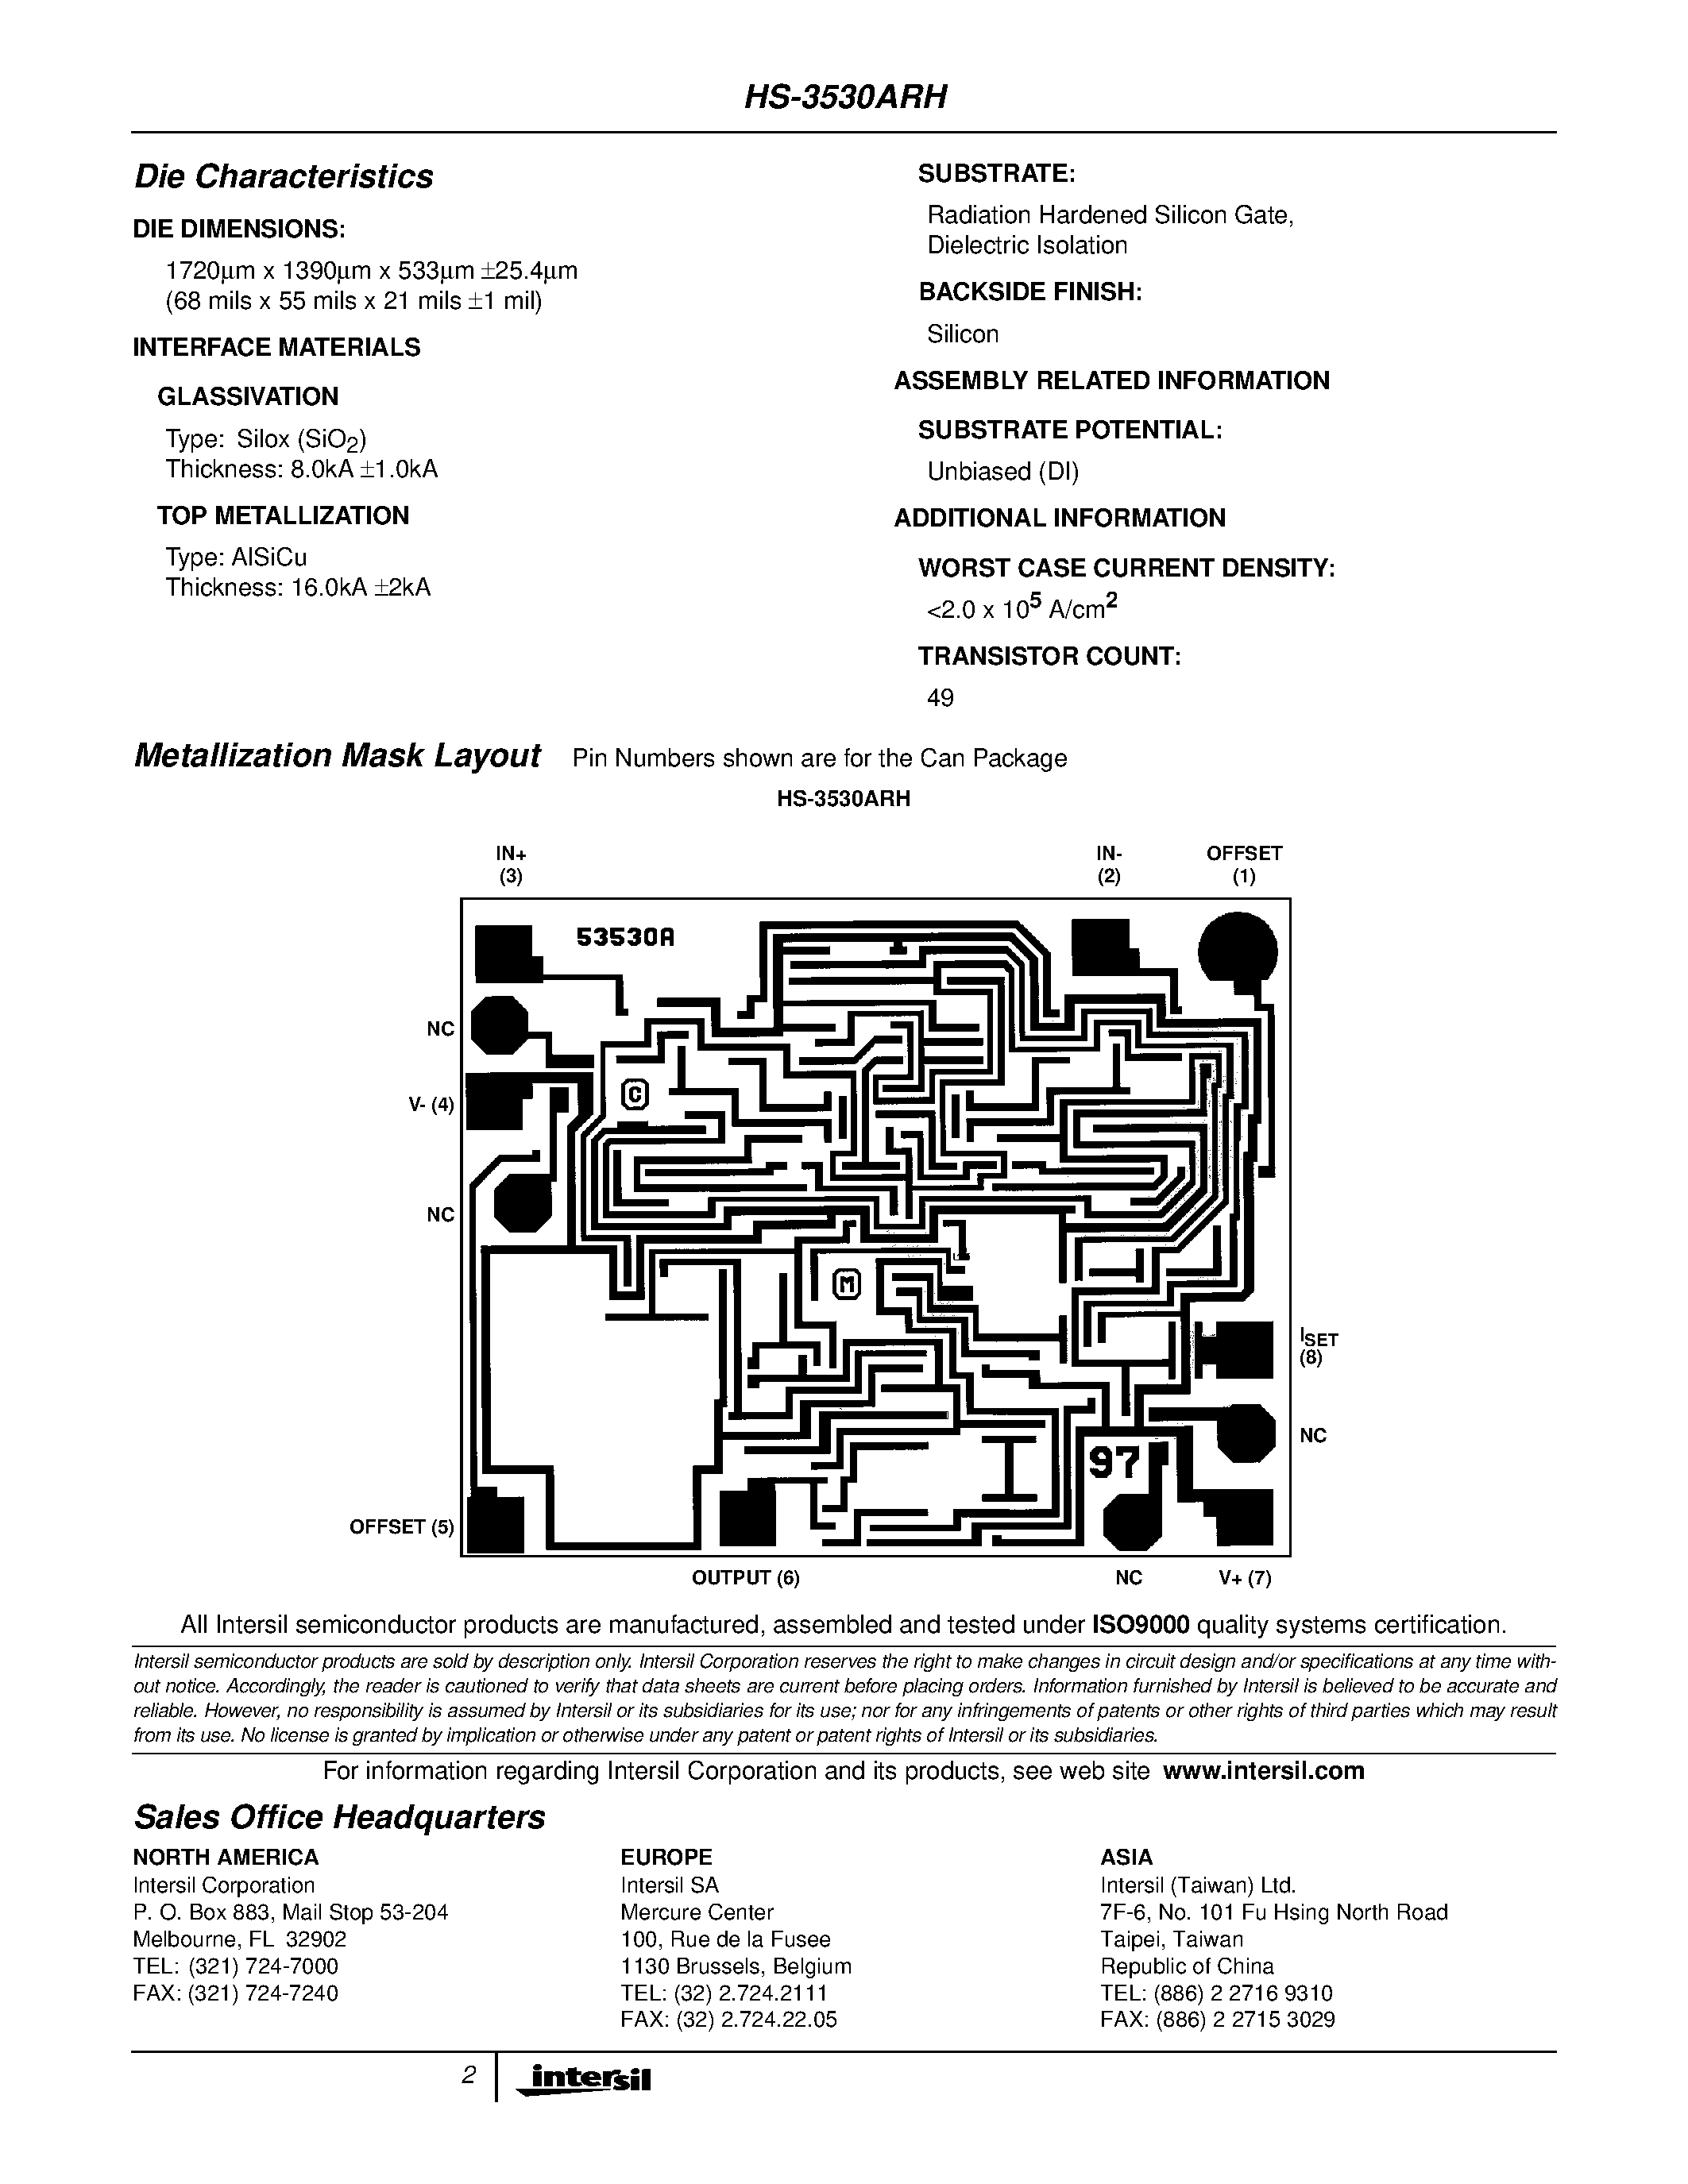 Datasheet HS0-3530ARH-Q - Radiation Hardened Programmable Low Power Op Amp page 2